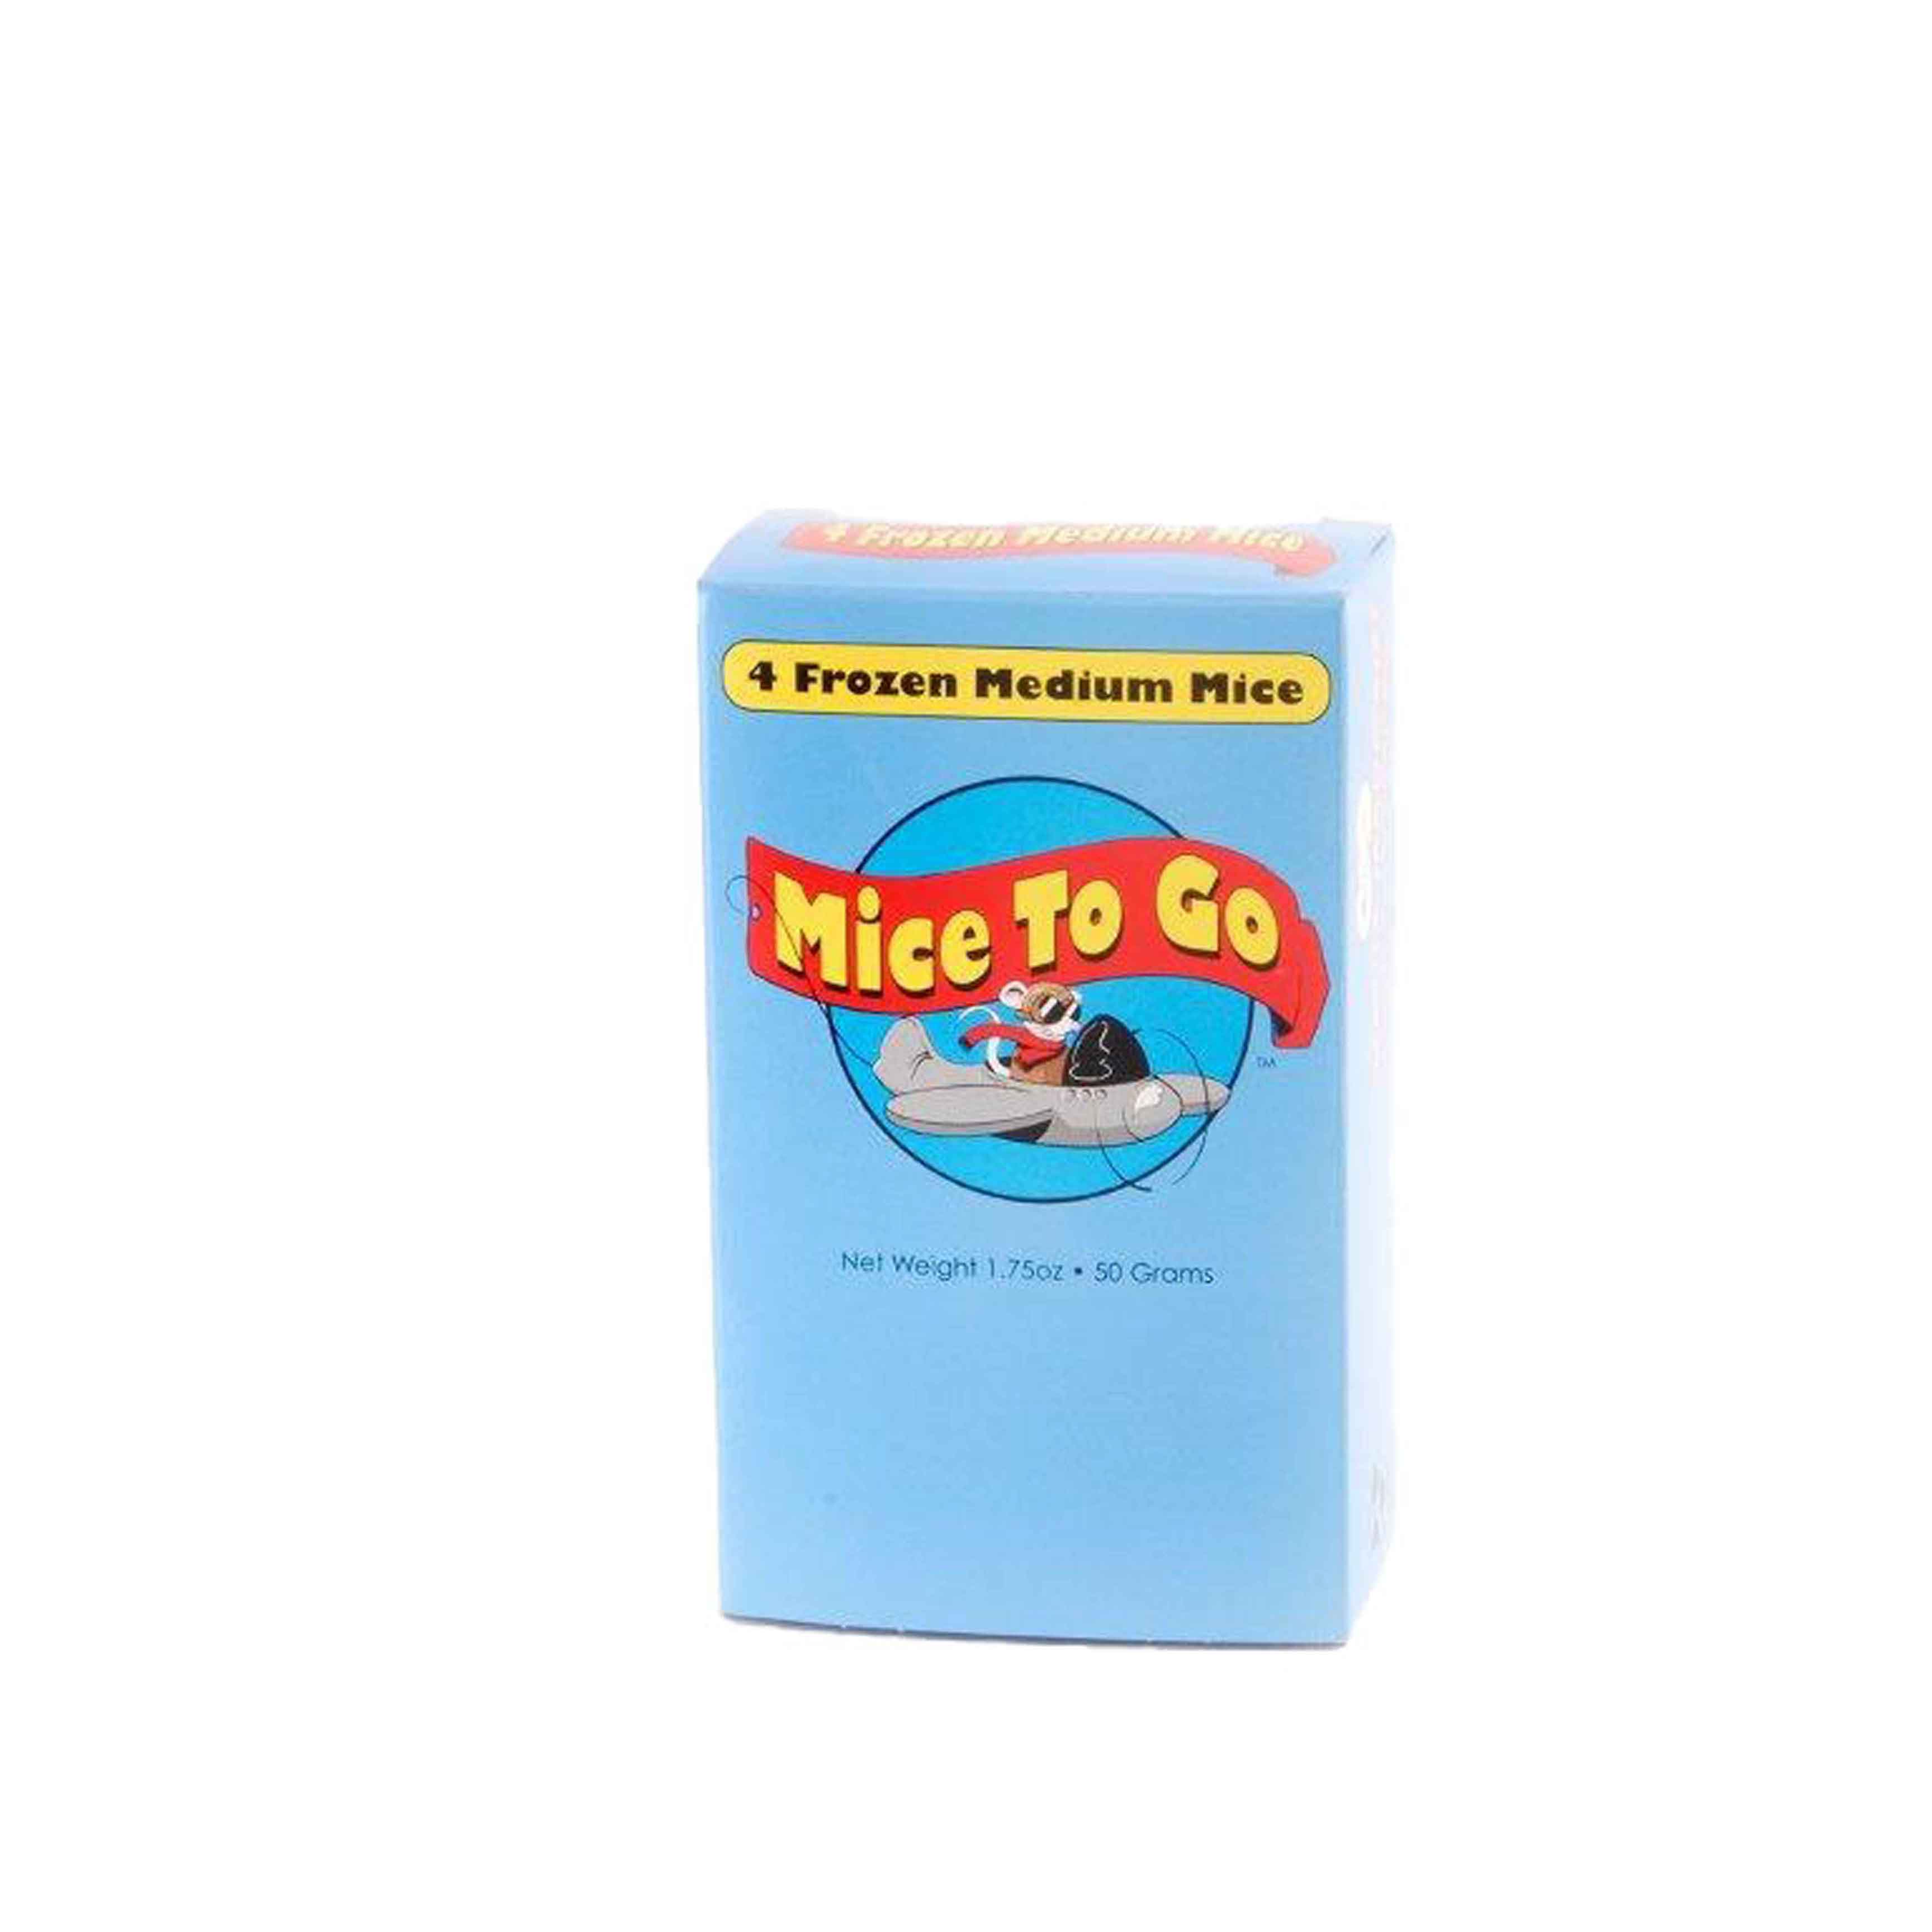 Mice To Go Medium Mouse 4ct